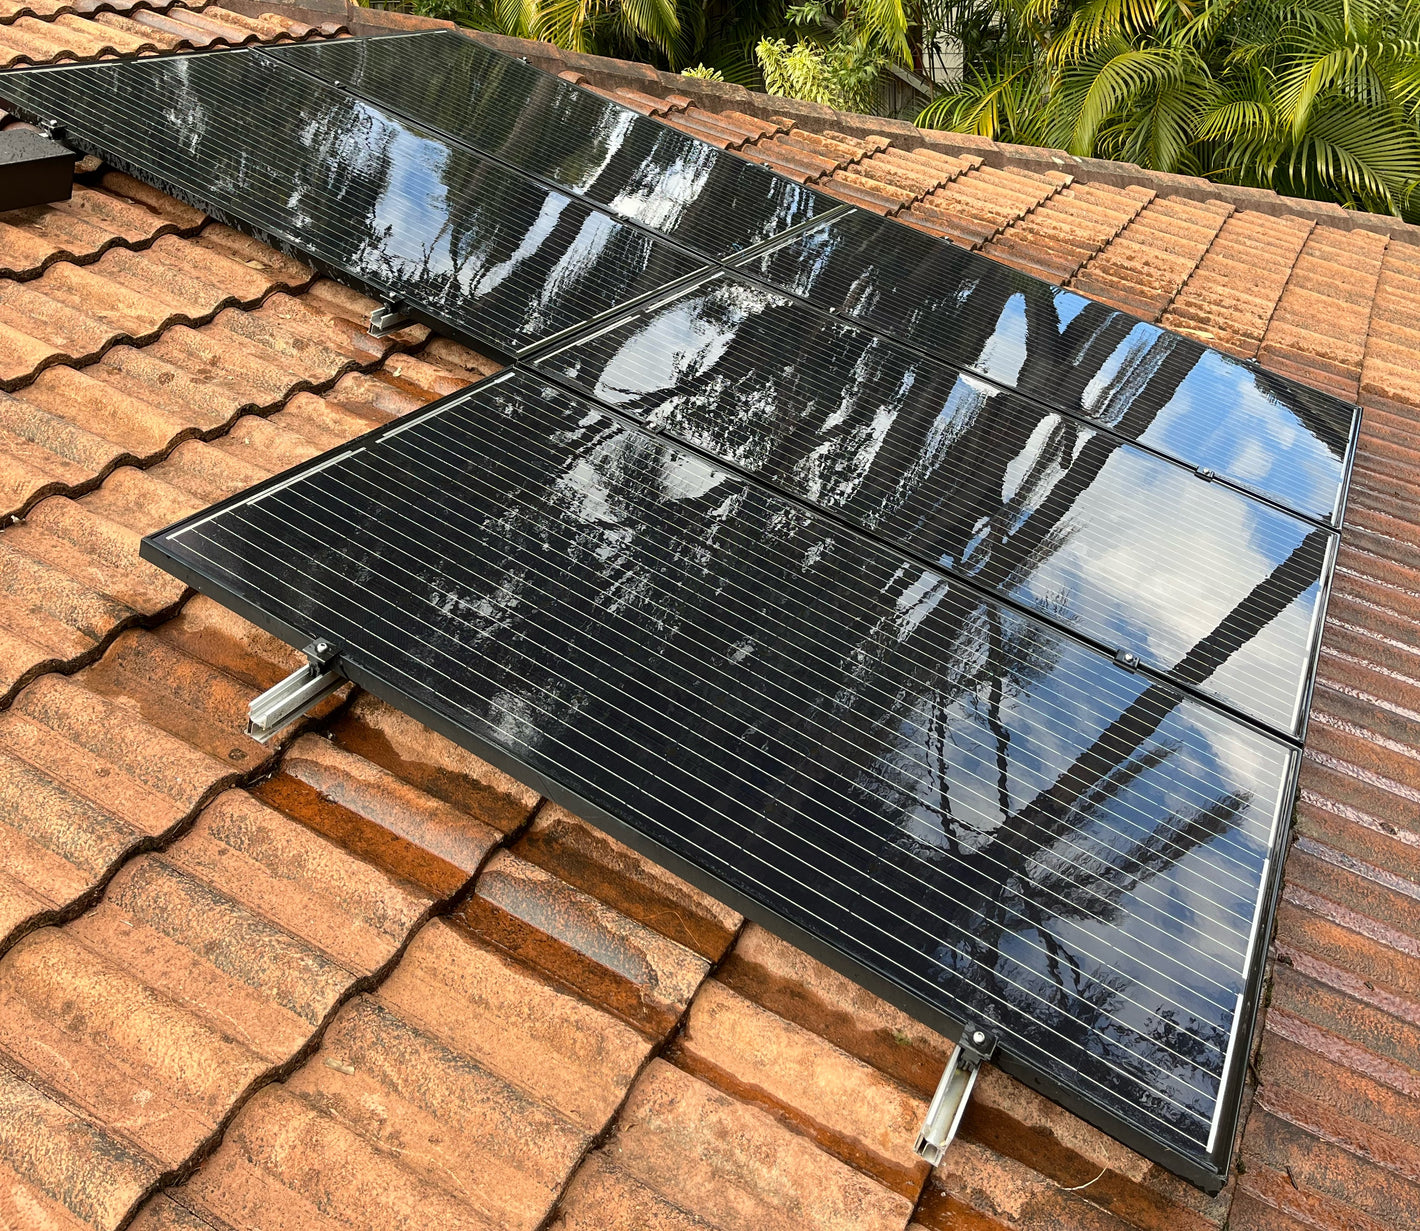 AFTER CLEANING SOLAR PANELS